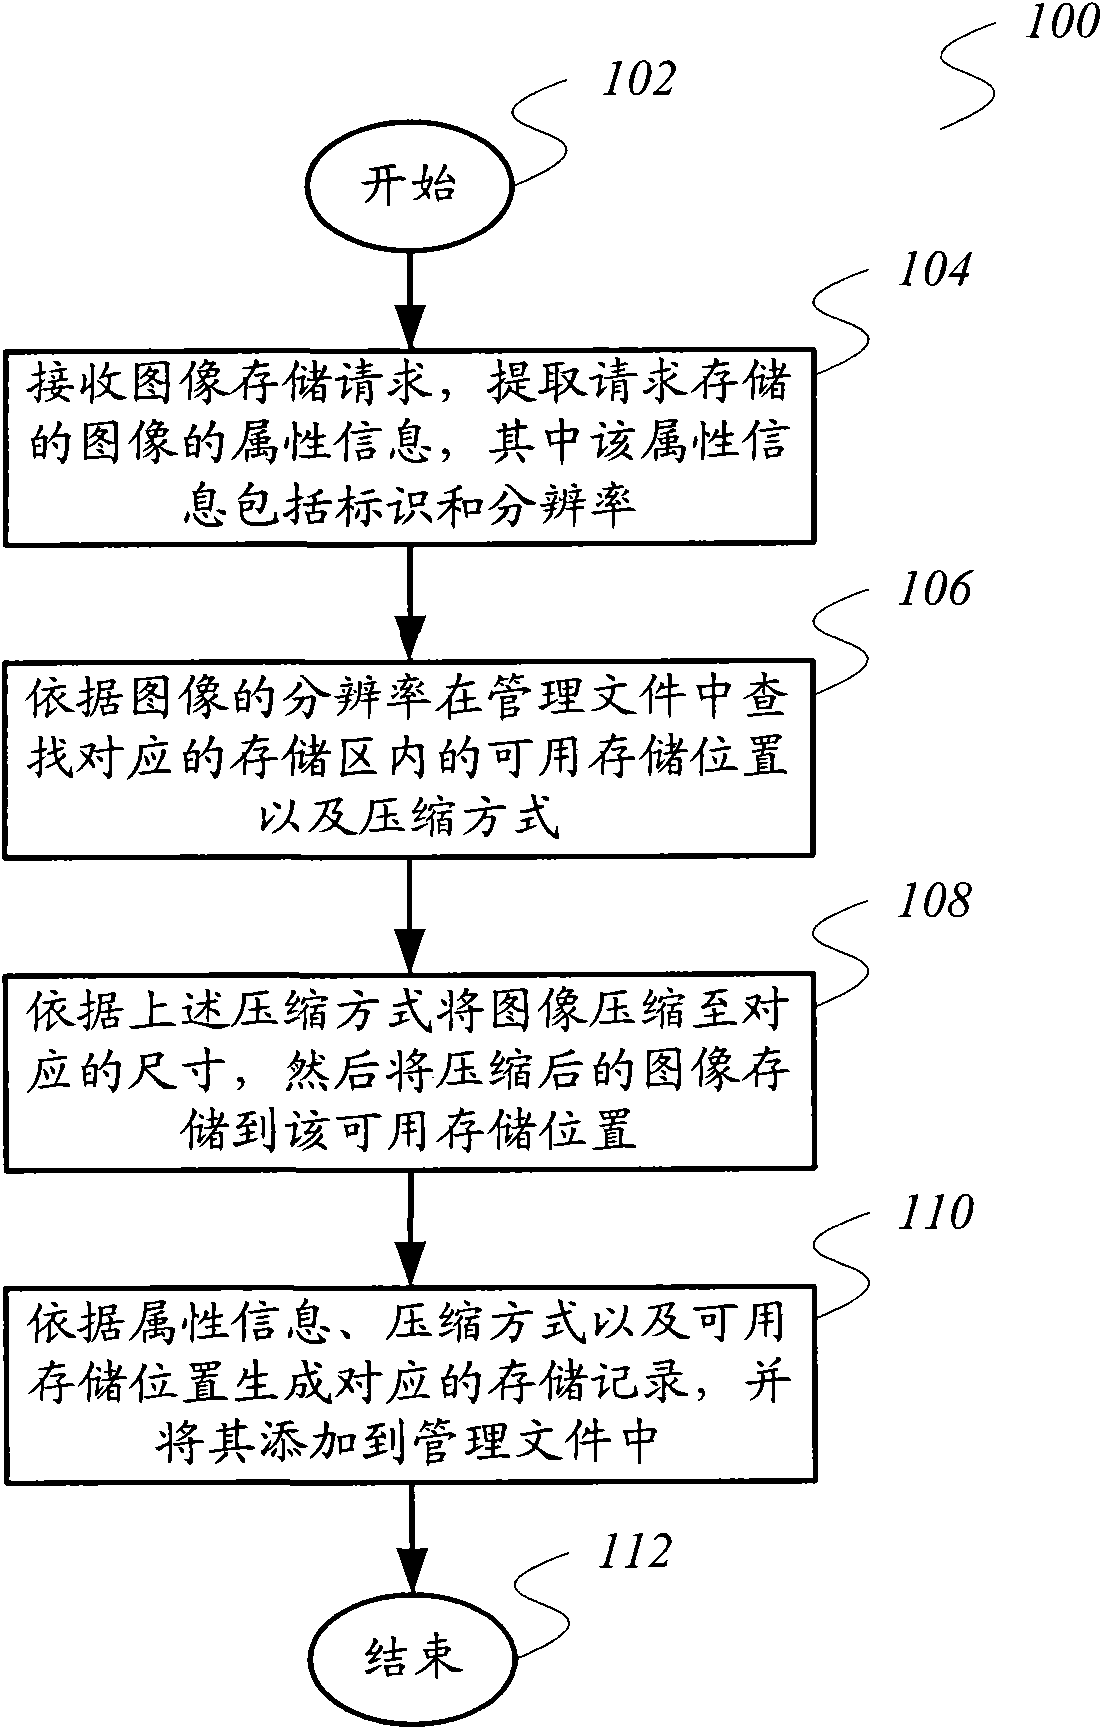 Image file management method and system